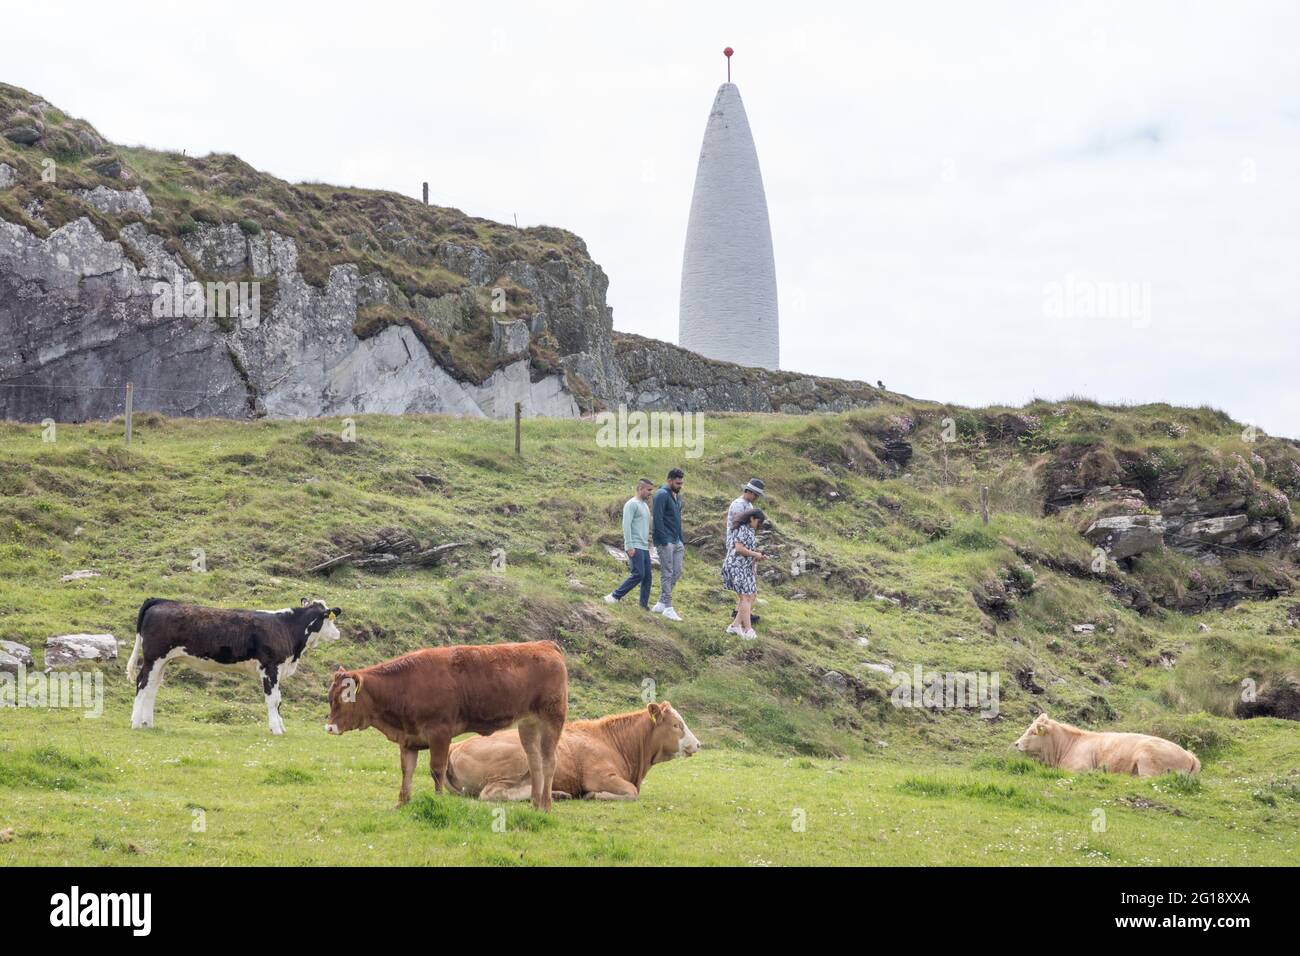 Baltimore, Cork, Ireland. 05th June, 2021. Tourists wander around resting cattle on the headland and cliffs during a warm bank holiday weekend at the Beacon in Baltimore,  West Cork, Ireland. - Credit; David Creedon / Alamy Live News Stock Photo